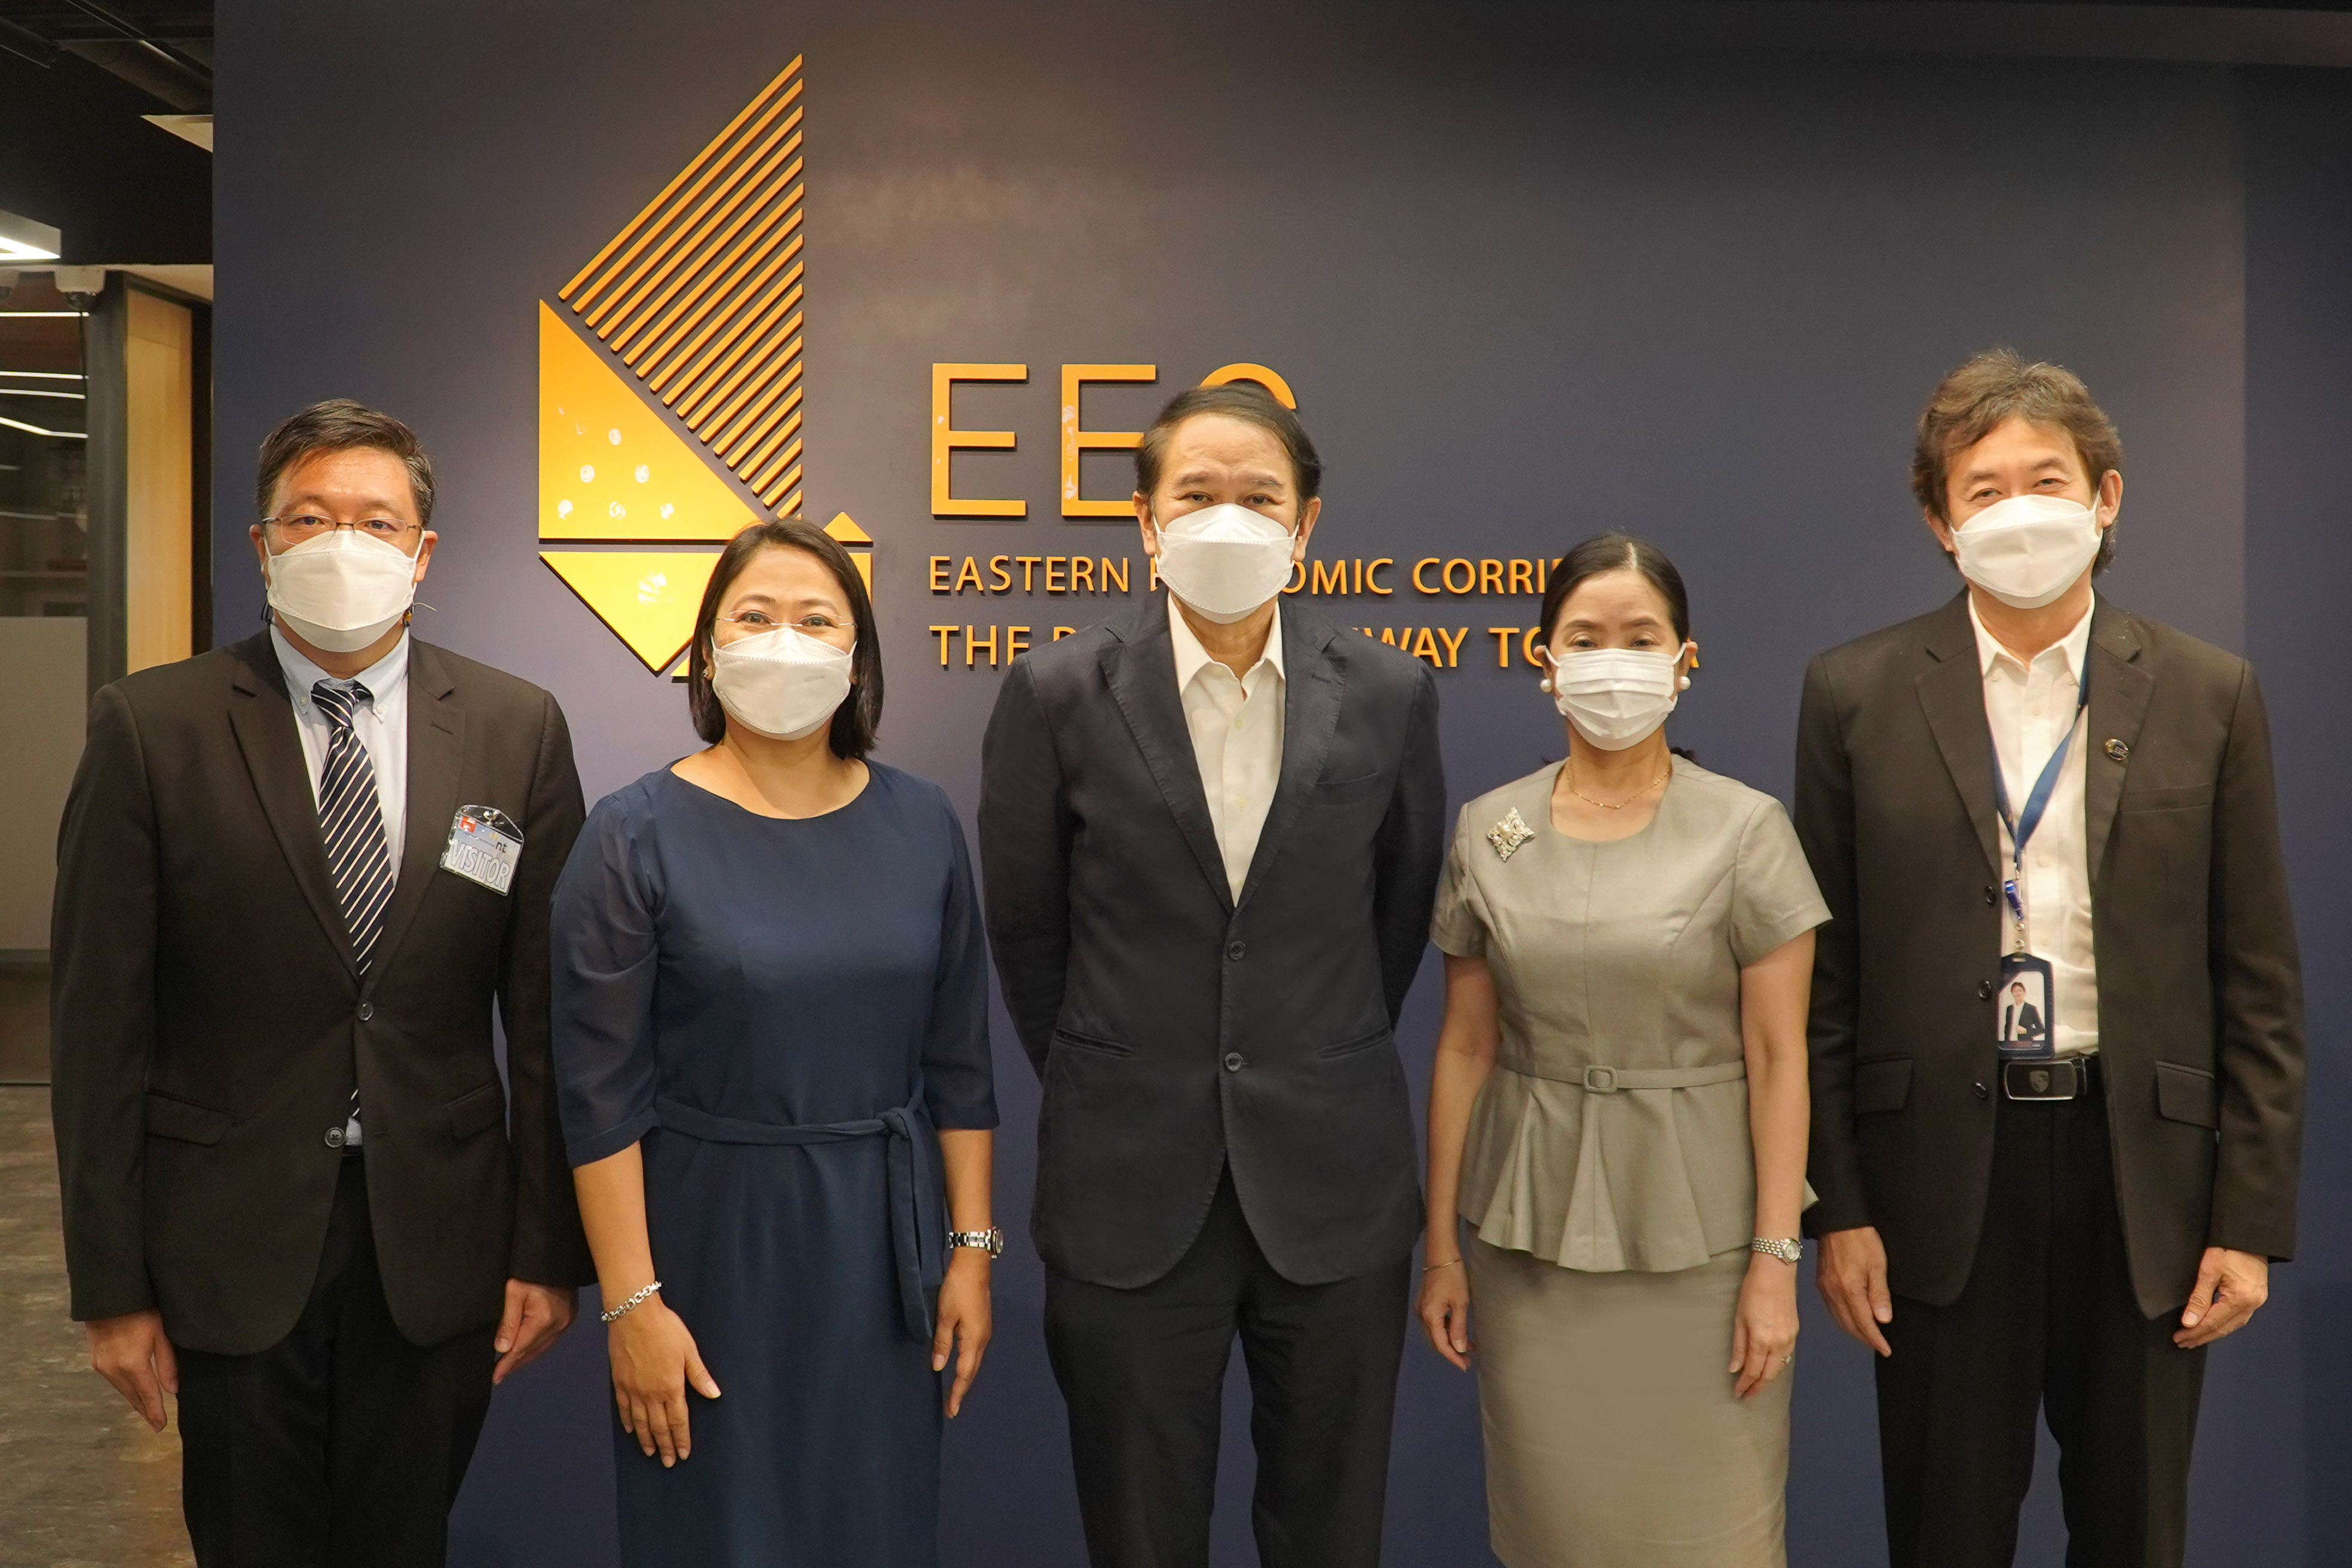 EXIM Thailand Visits Secretary General of the Eastern Economic Corridor Office To Extend New Year 2022 Greetings